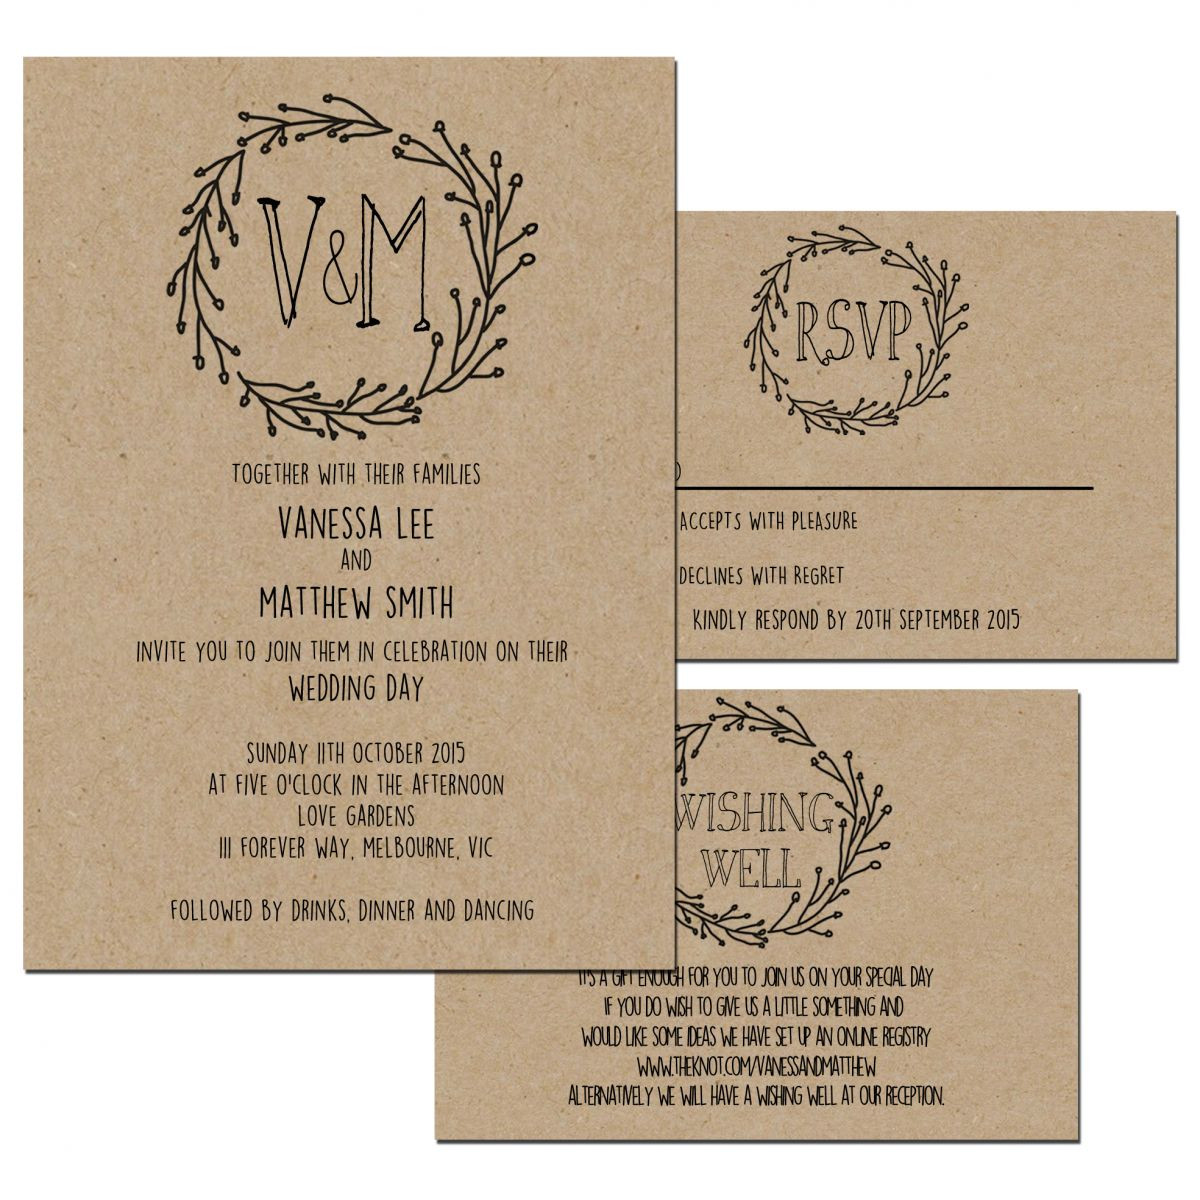 When To Mail Out Wedding Invitations
 WHEN TO SEND OUT YOUR WEDDING INVITATIONS